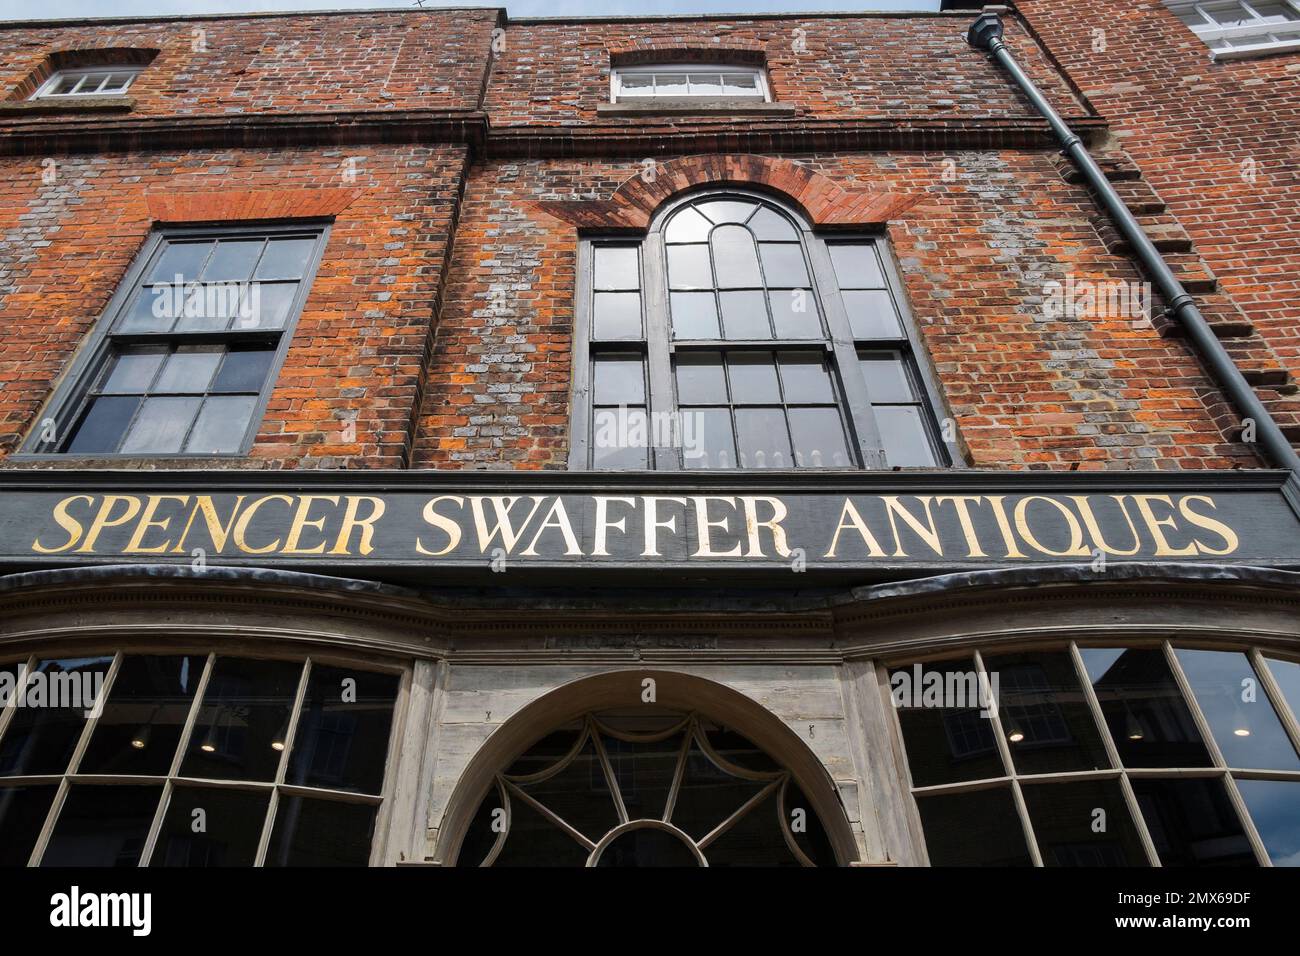 The shopfront of Spencer Swaffer, an eclectic antique shop on the High Street in Arundel, West Sussex, UK Stock Photo